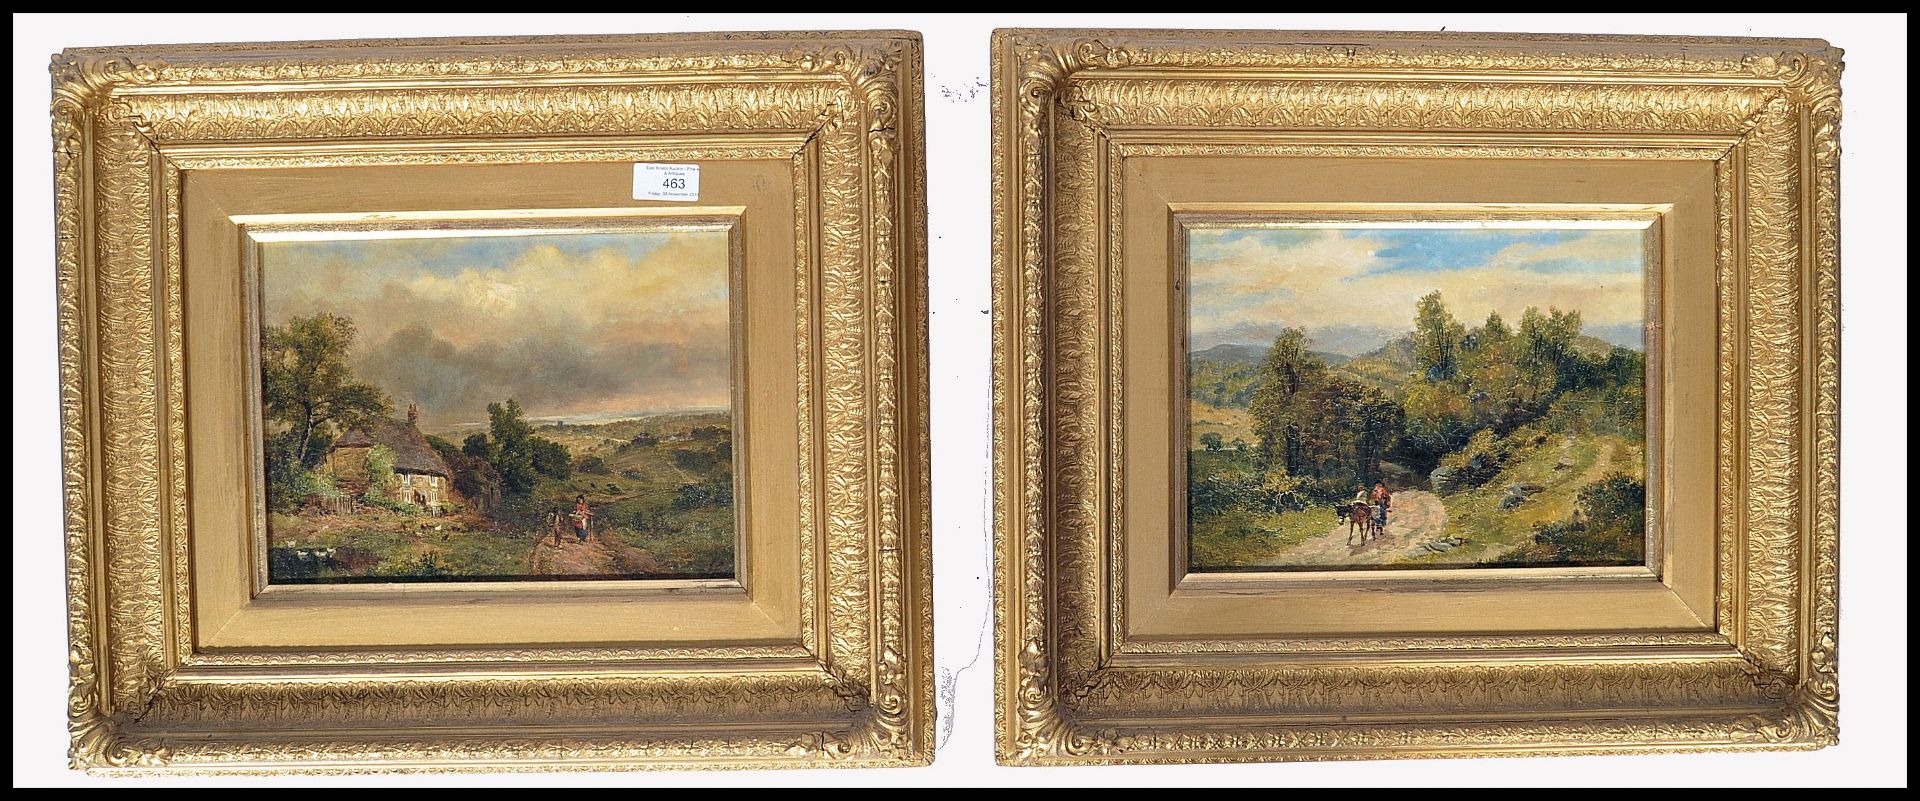 JAMES PEEL (1811-1906) RBA PAIR OF OIL ON CANVAS LANDSCAPE NORTH COUNTY PAINTINGS